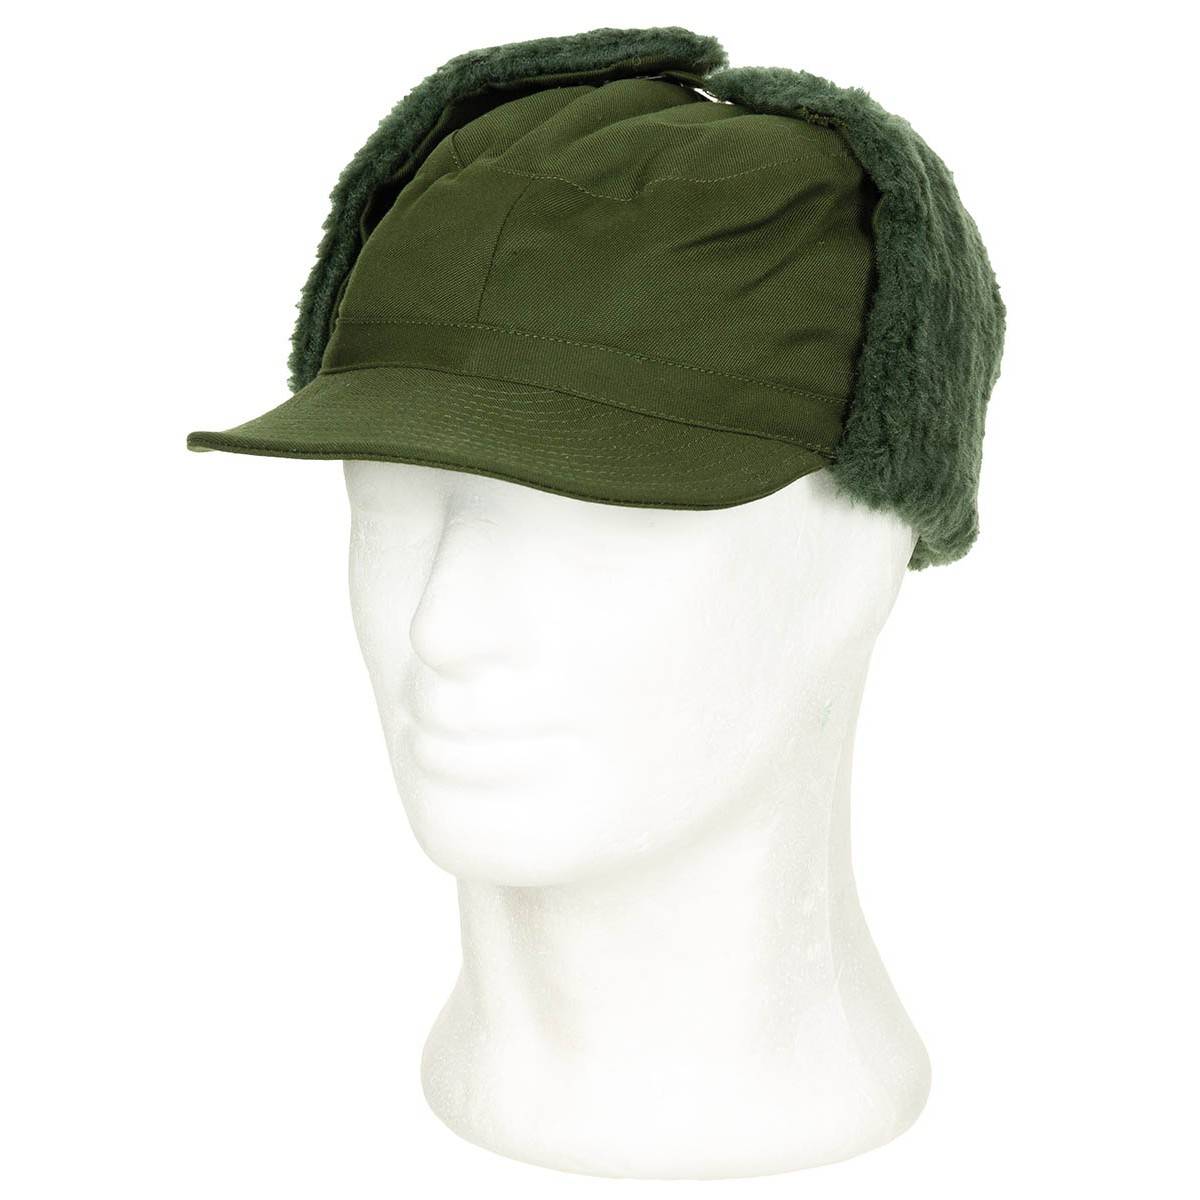 WINTER CAP M59 - OD GREEN - MILITARY SURPLUS FROM THE SWEDISH ARMY - USED